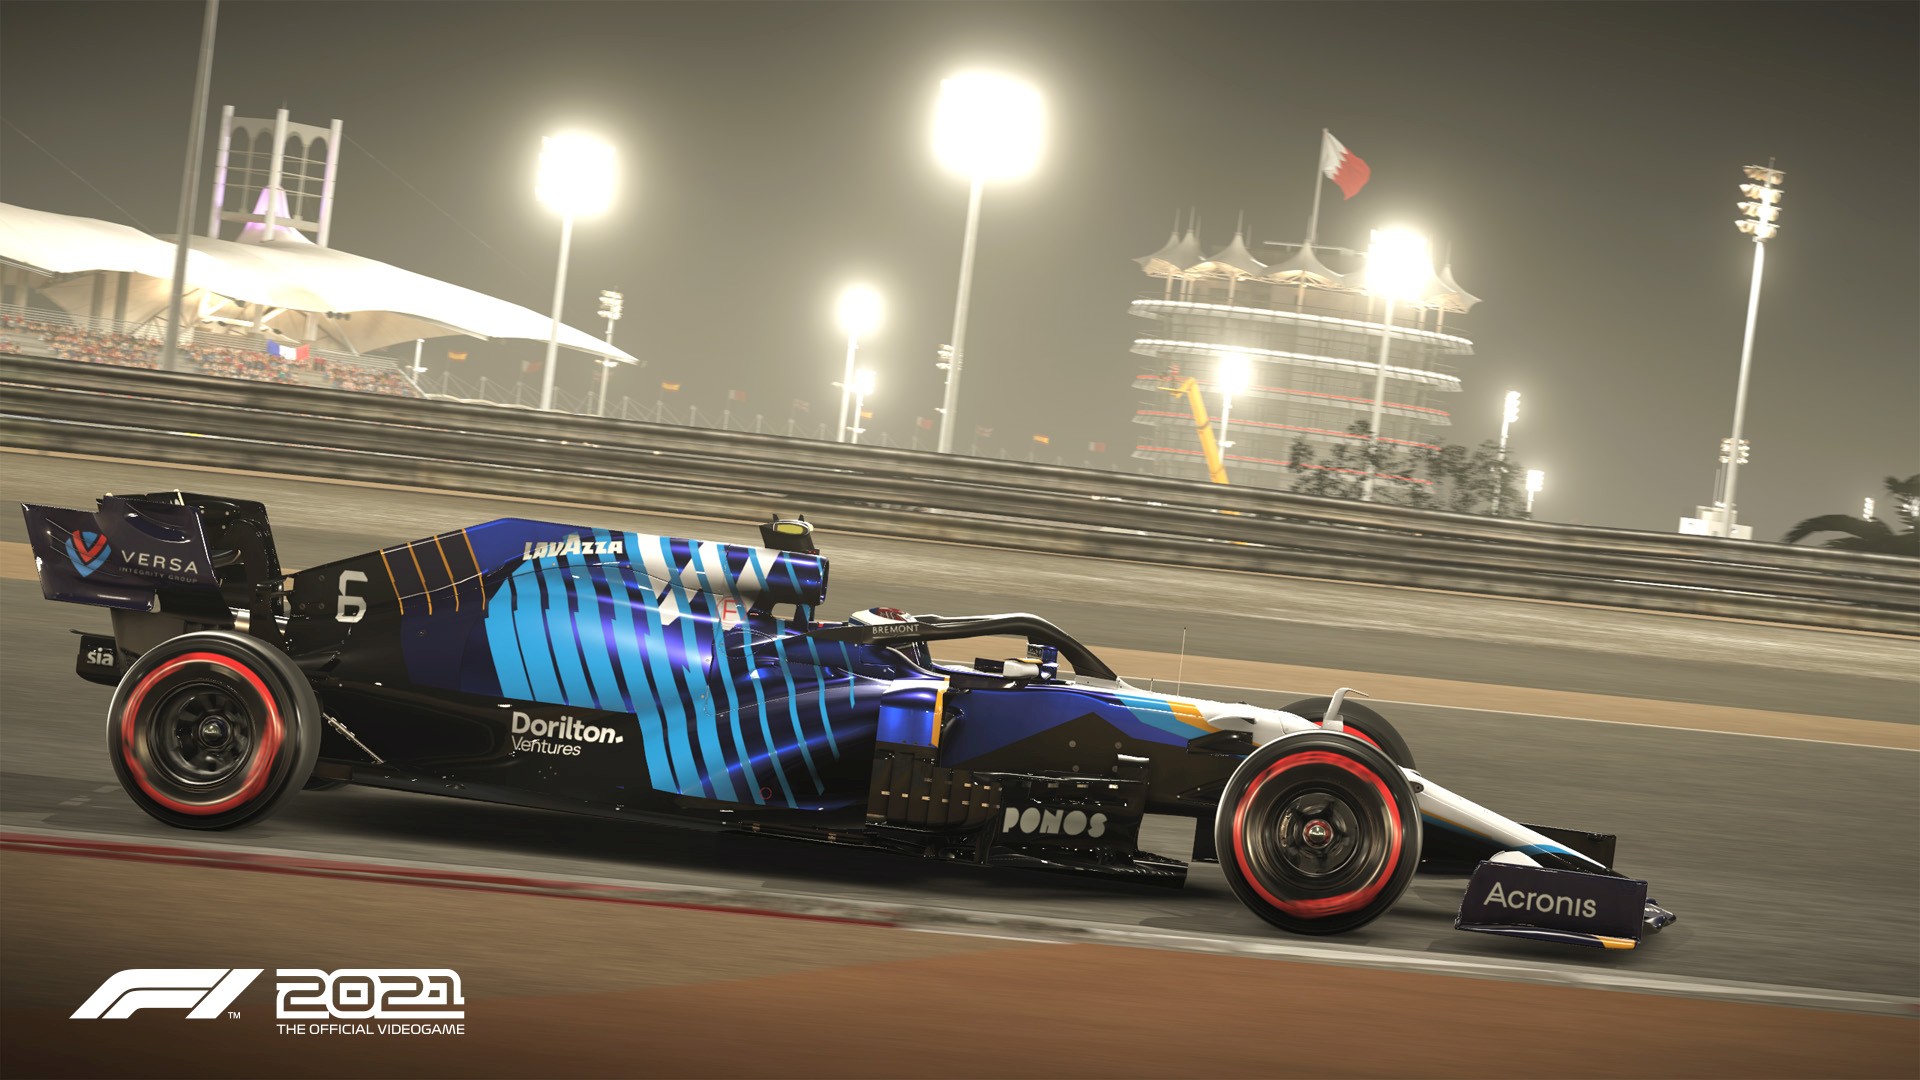 Let's Race Together: F1 2020 is Out Now for Xbox One - Xbox Wire